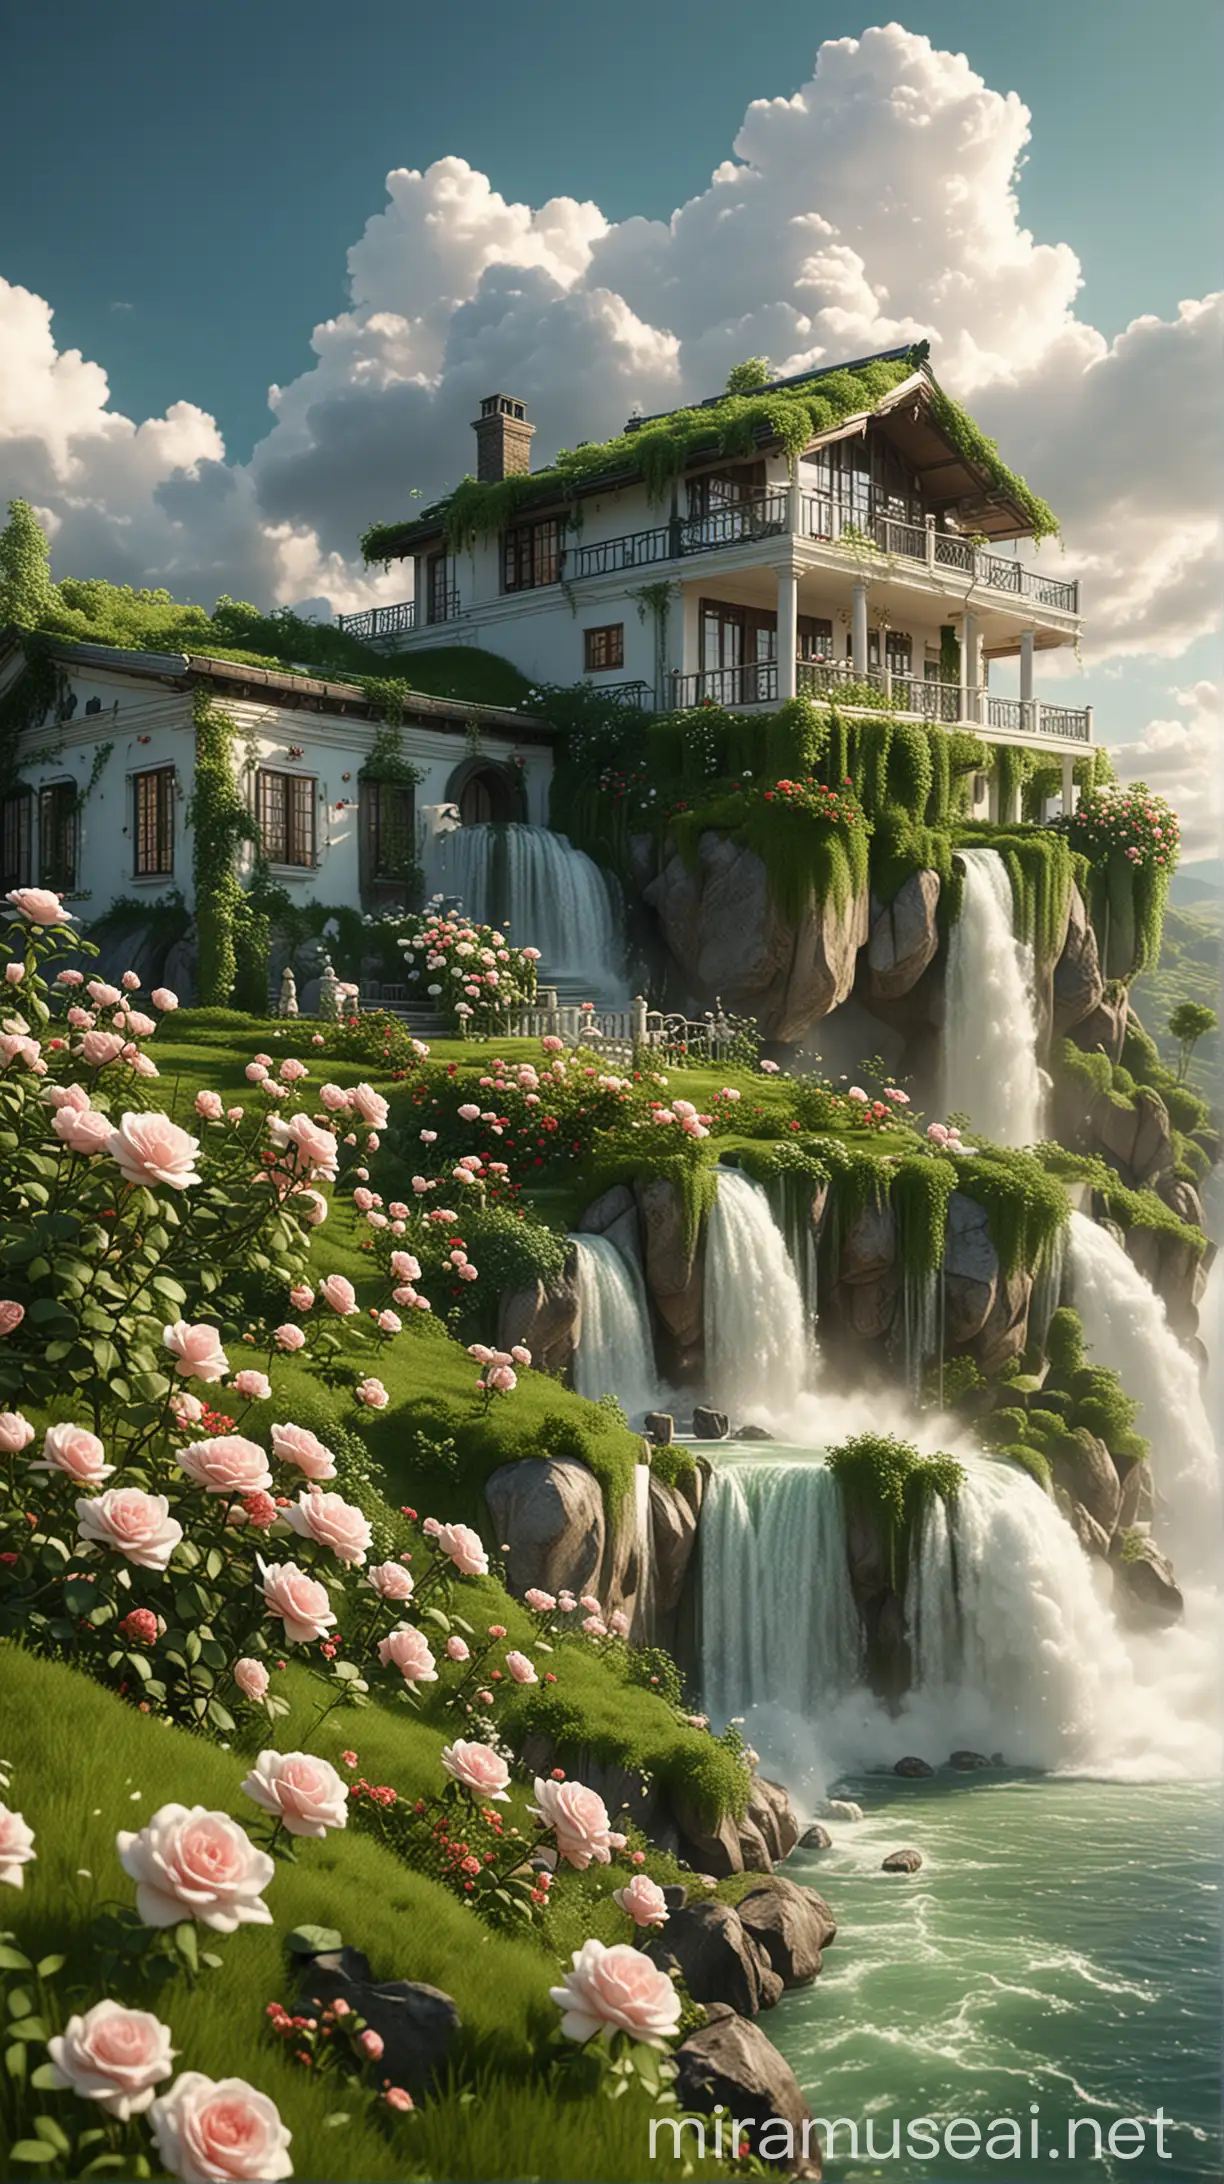 Realistic CG Rendering of Juck Zhang with Green Villa Rose Waterfall and Cotton Clouds